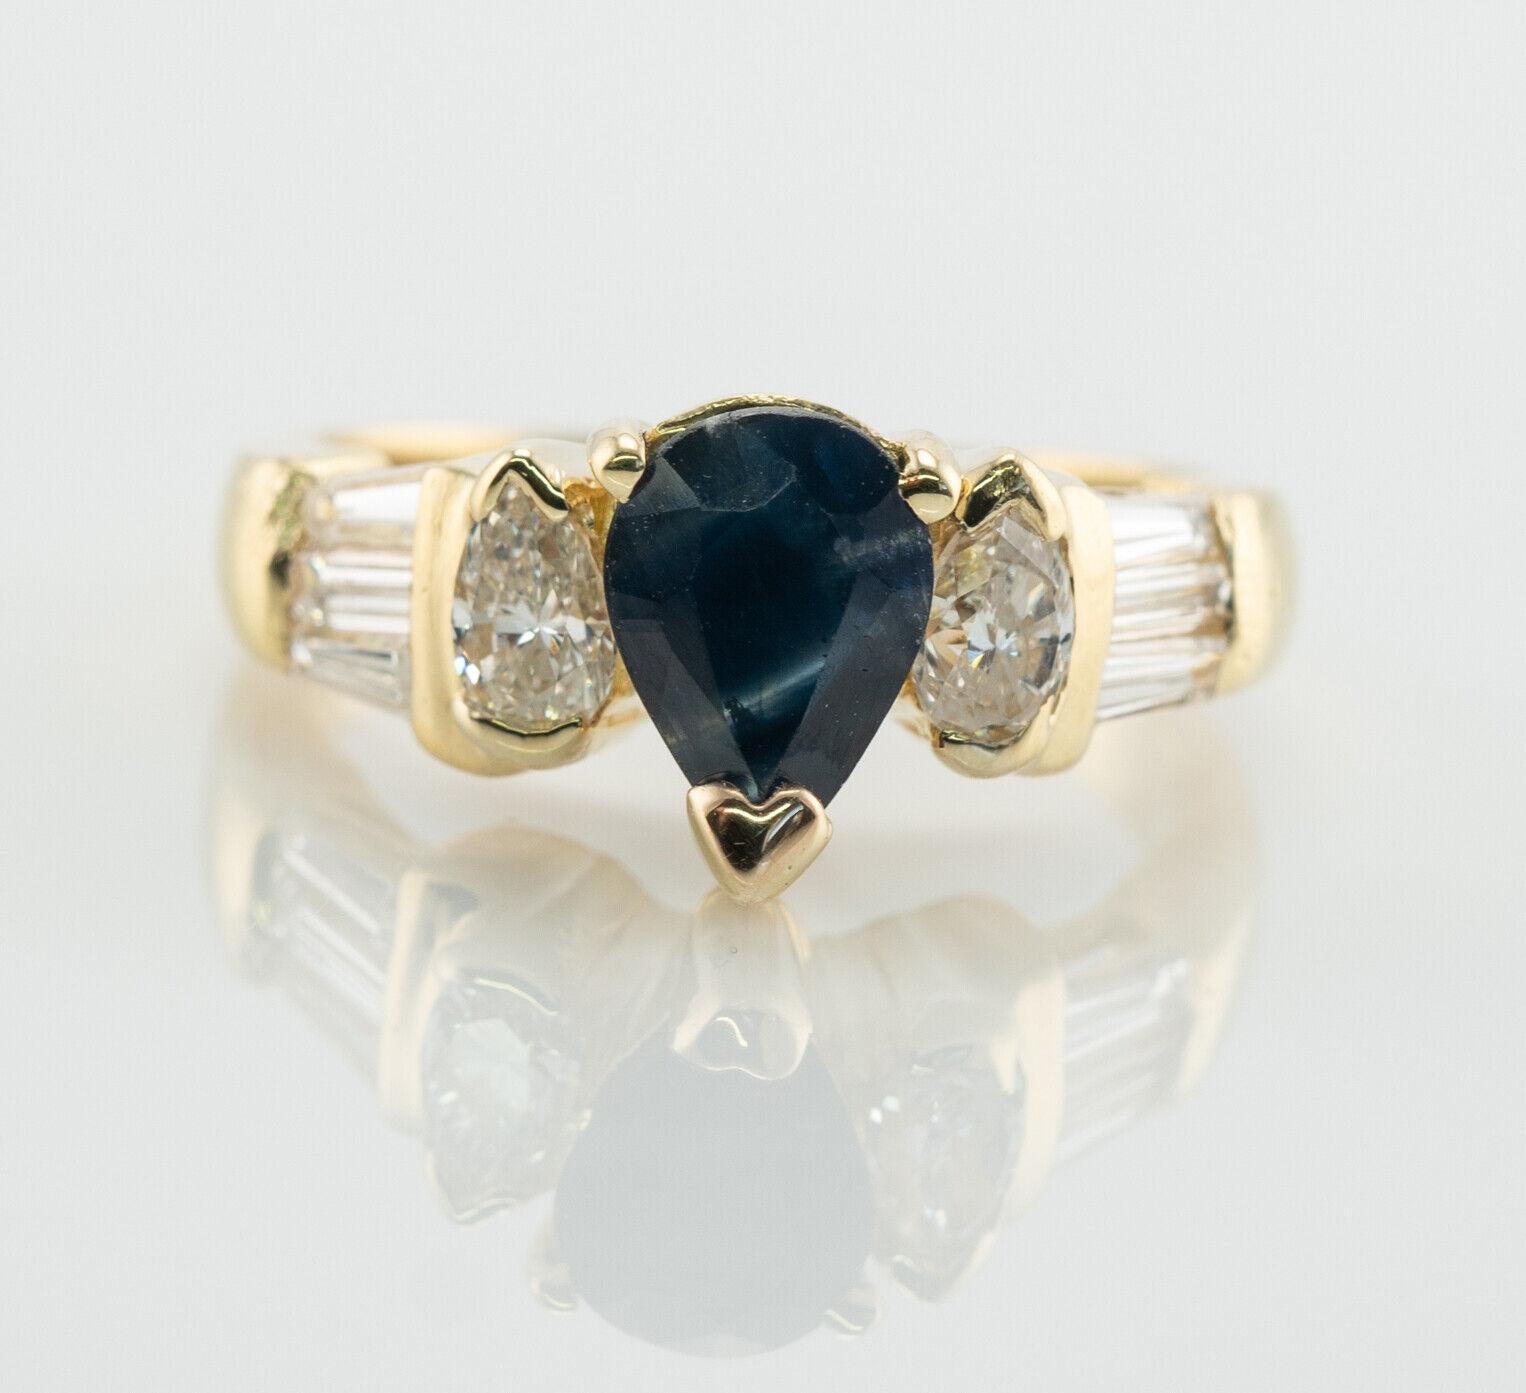 This lovely estate ring is finely crafted in solid 18K Yellow Gold and set with genuine Earth mined Sapphire and white and fiery diamonds. The center pear cut Sapphire is .75 carat (7mm x 5mm). Two pear cut diamonds total .50 carat and six tapered